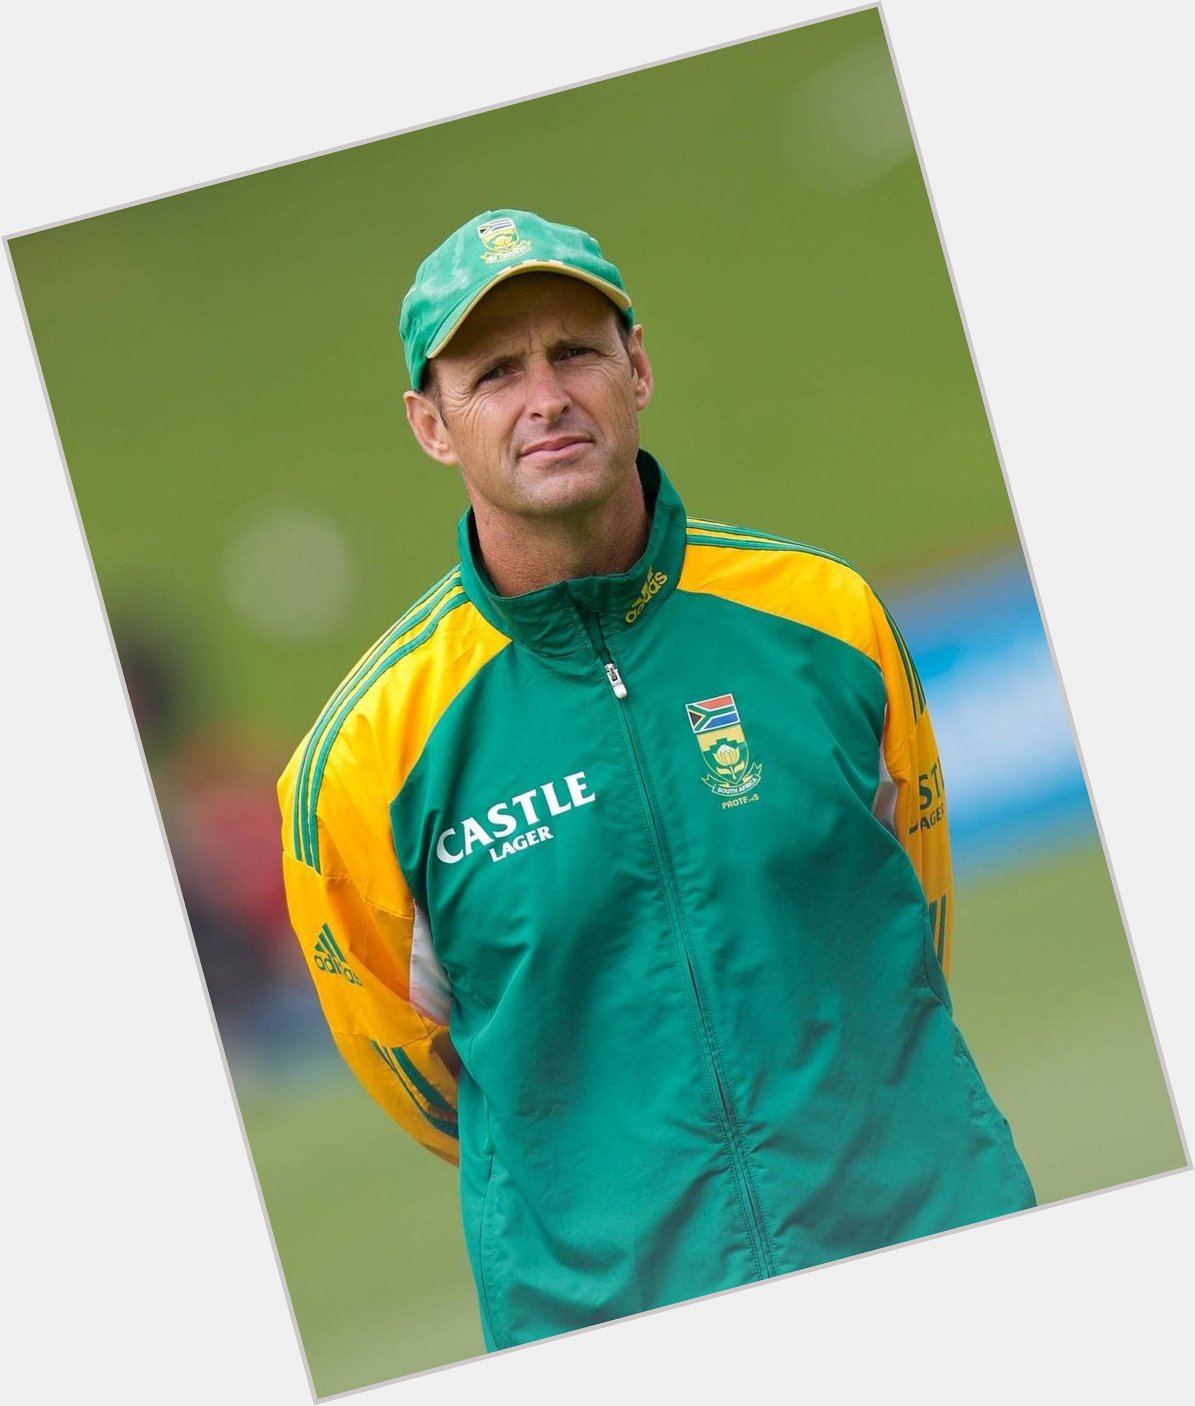 Happy birthday to South Africa great cricketer 